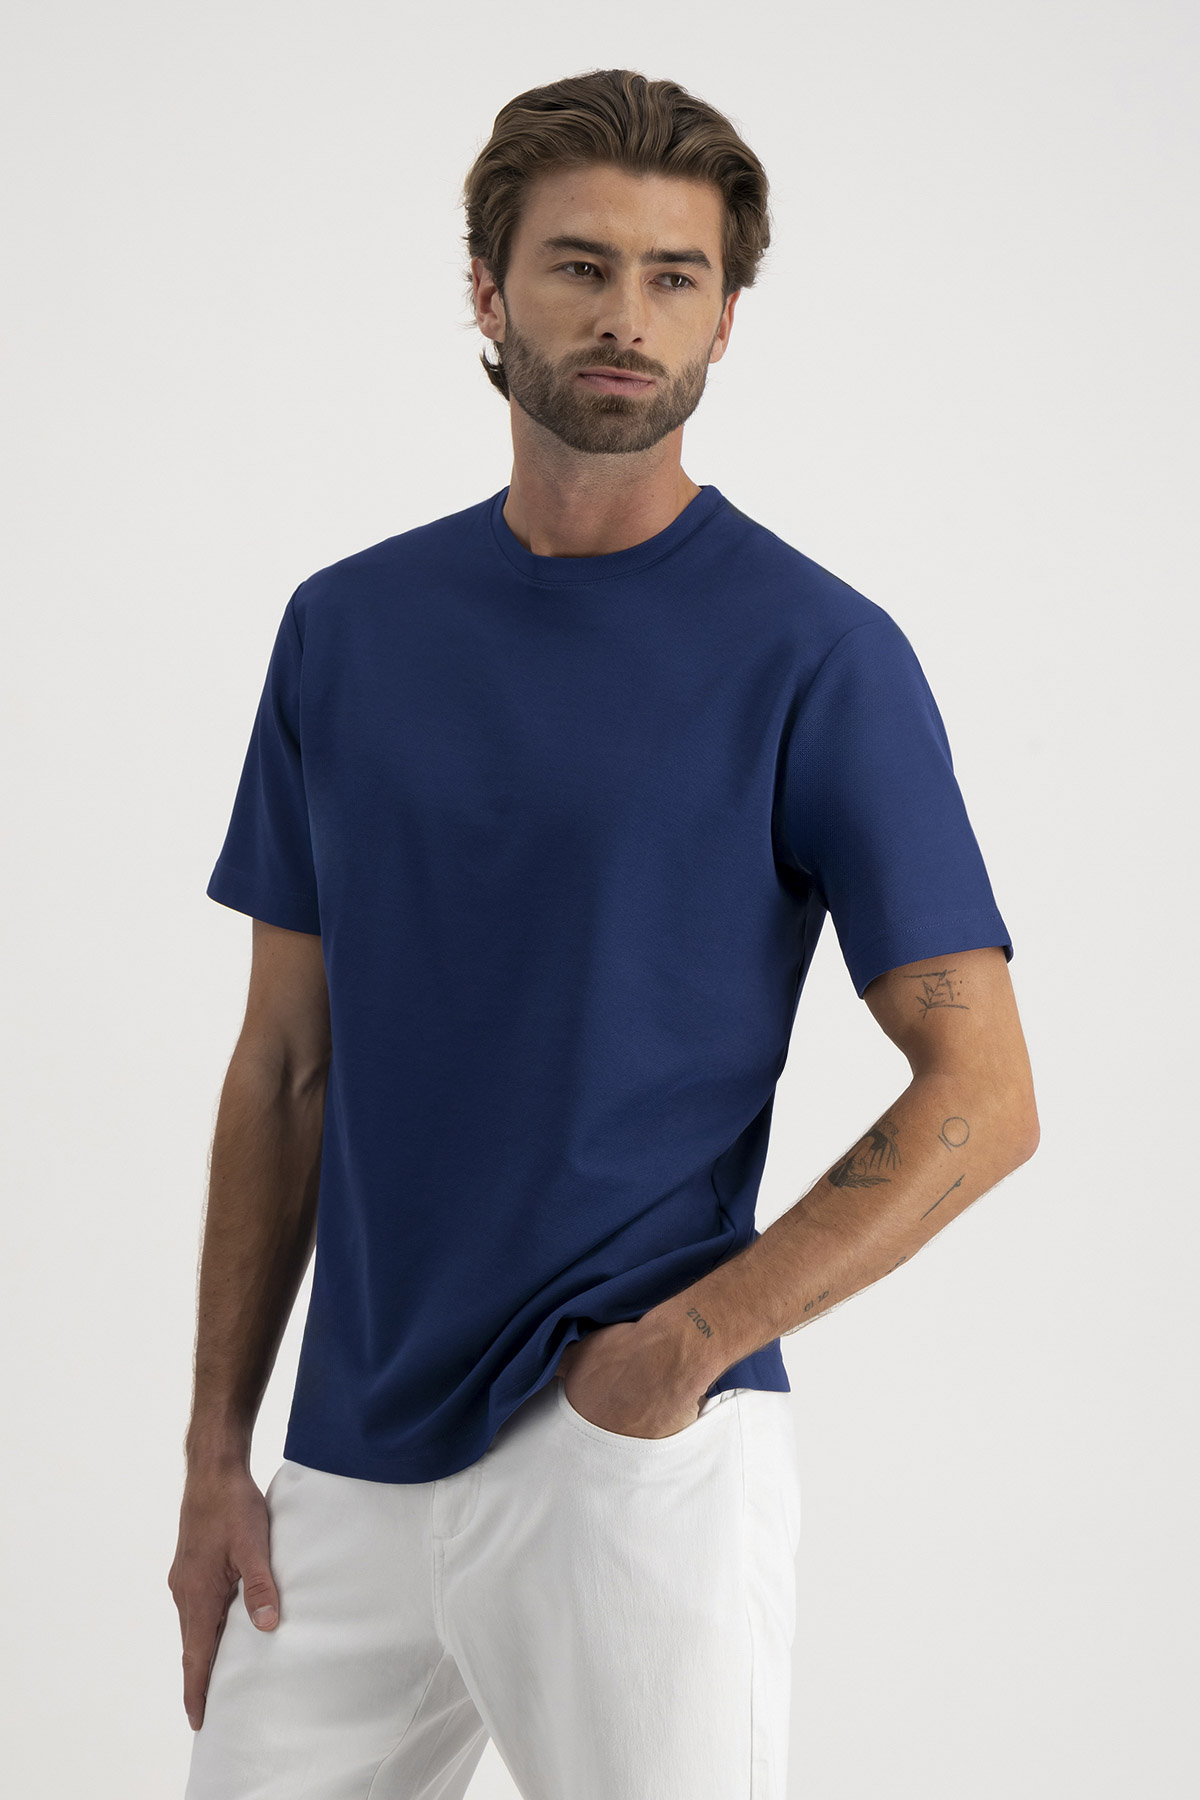 Playera EASY CARE TECHNOLOGY Roberts Color Azul Marino Contemporary Fit